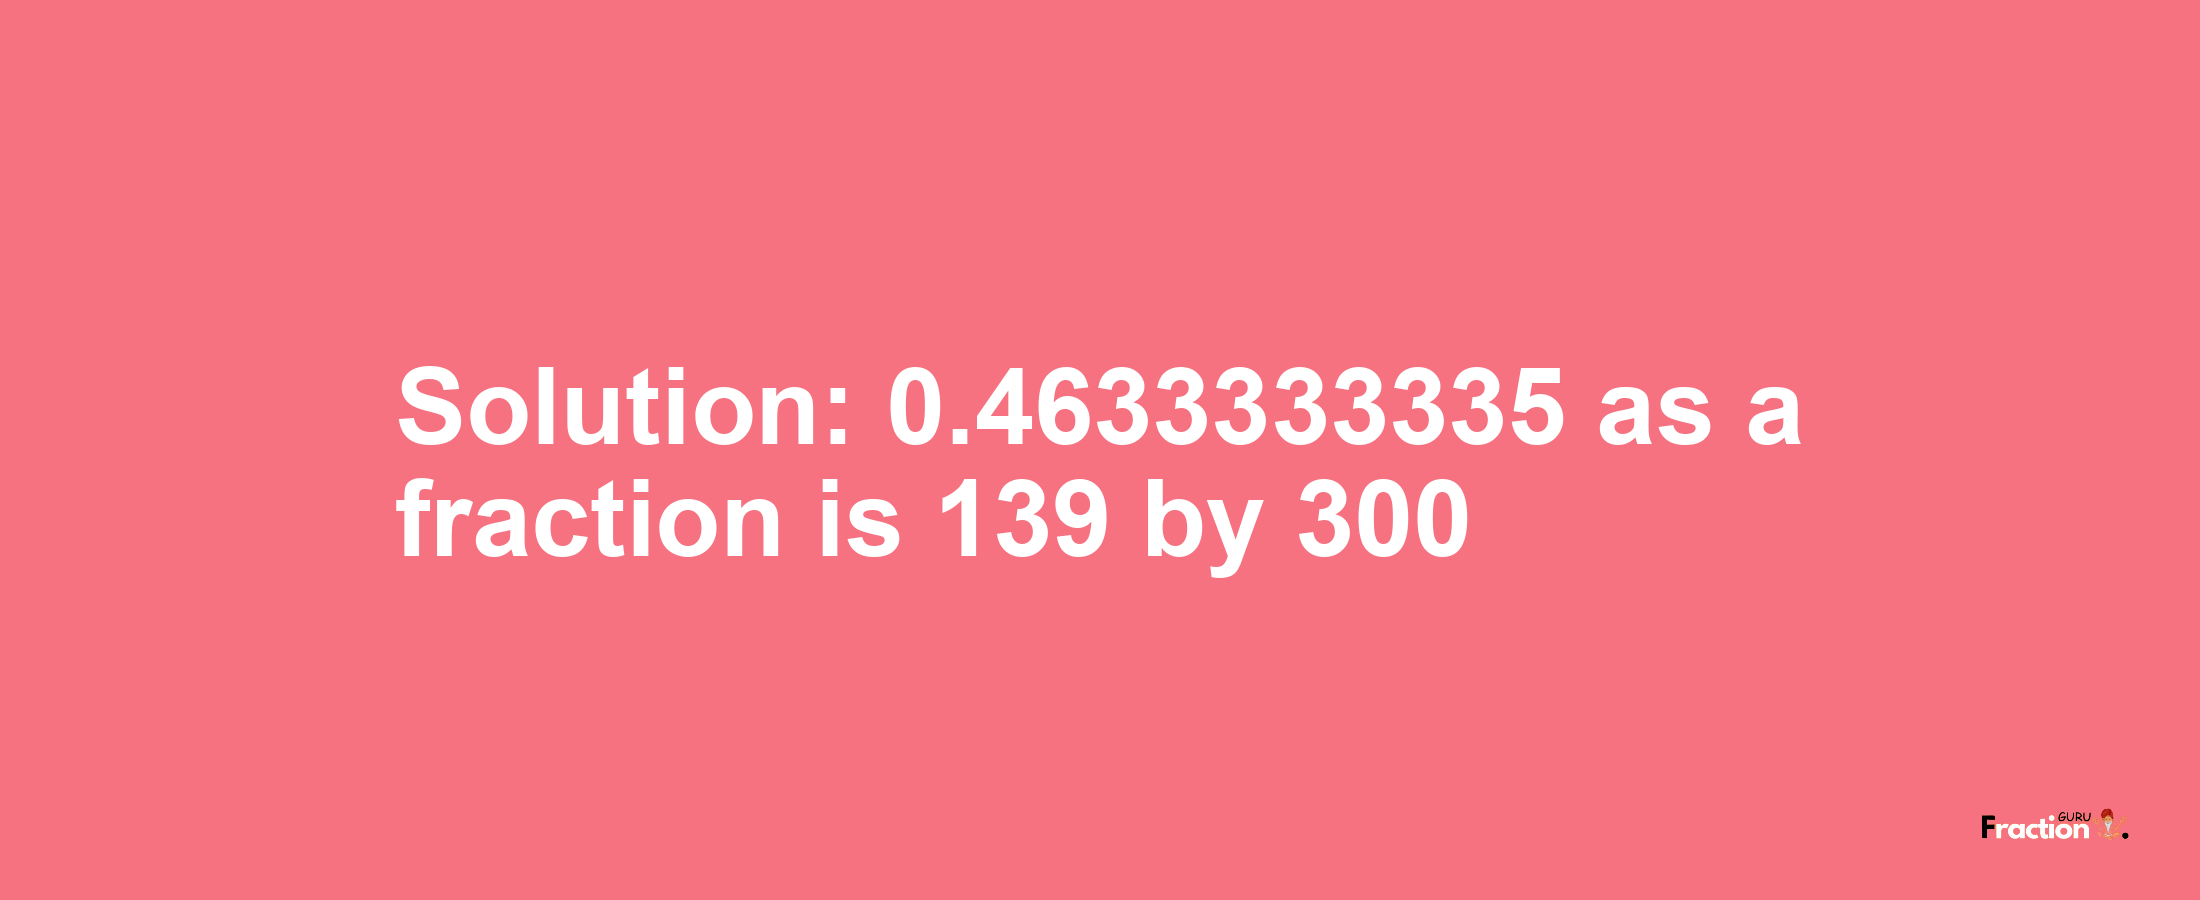 Solution:0.4633333335 as a fraction is 139/300